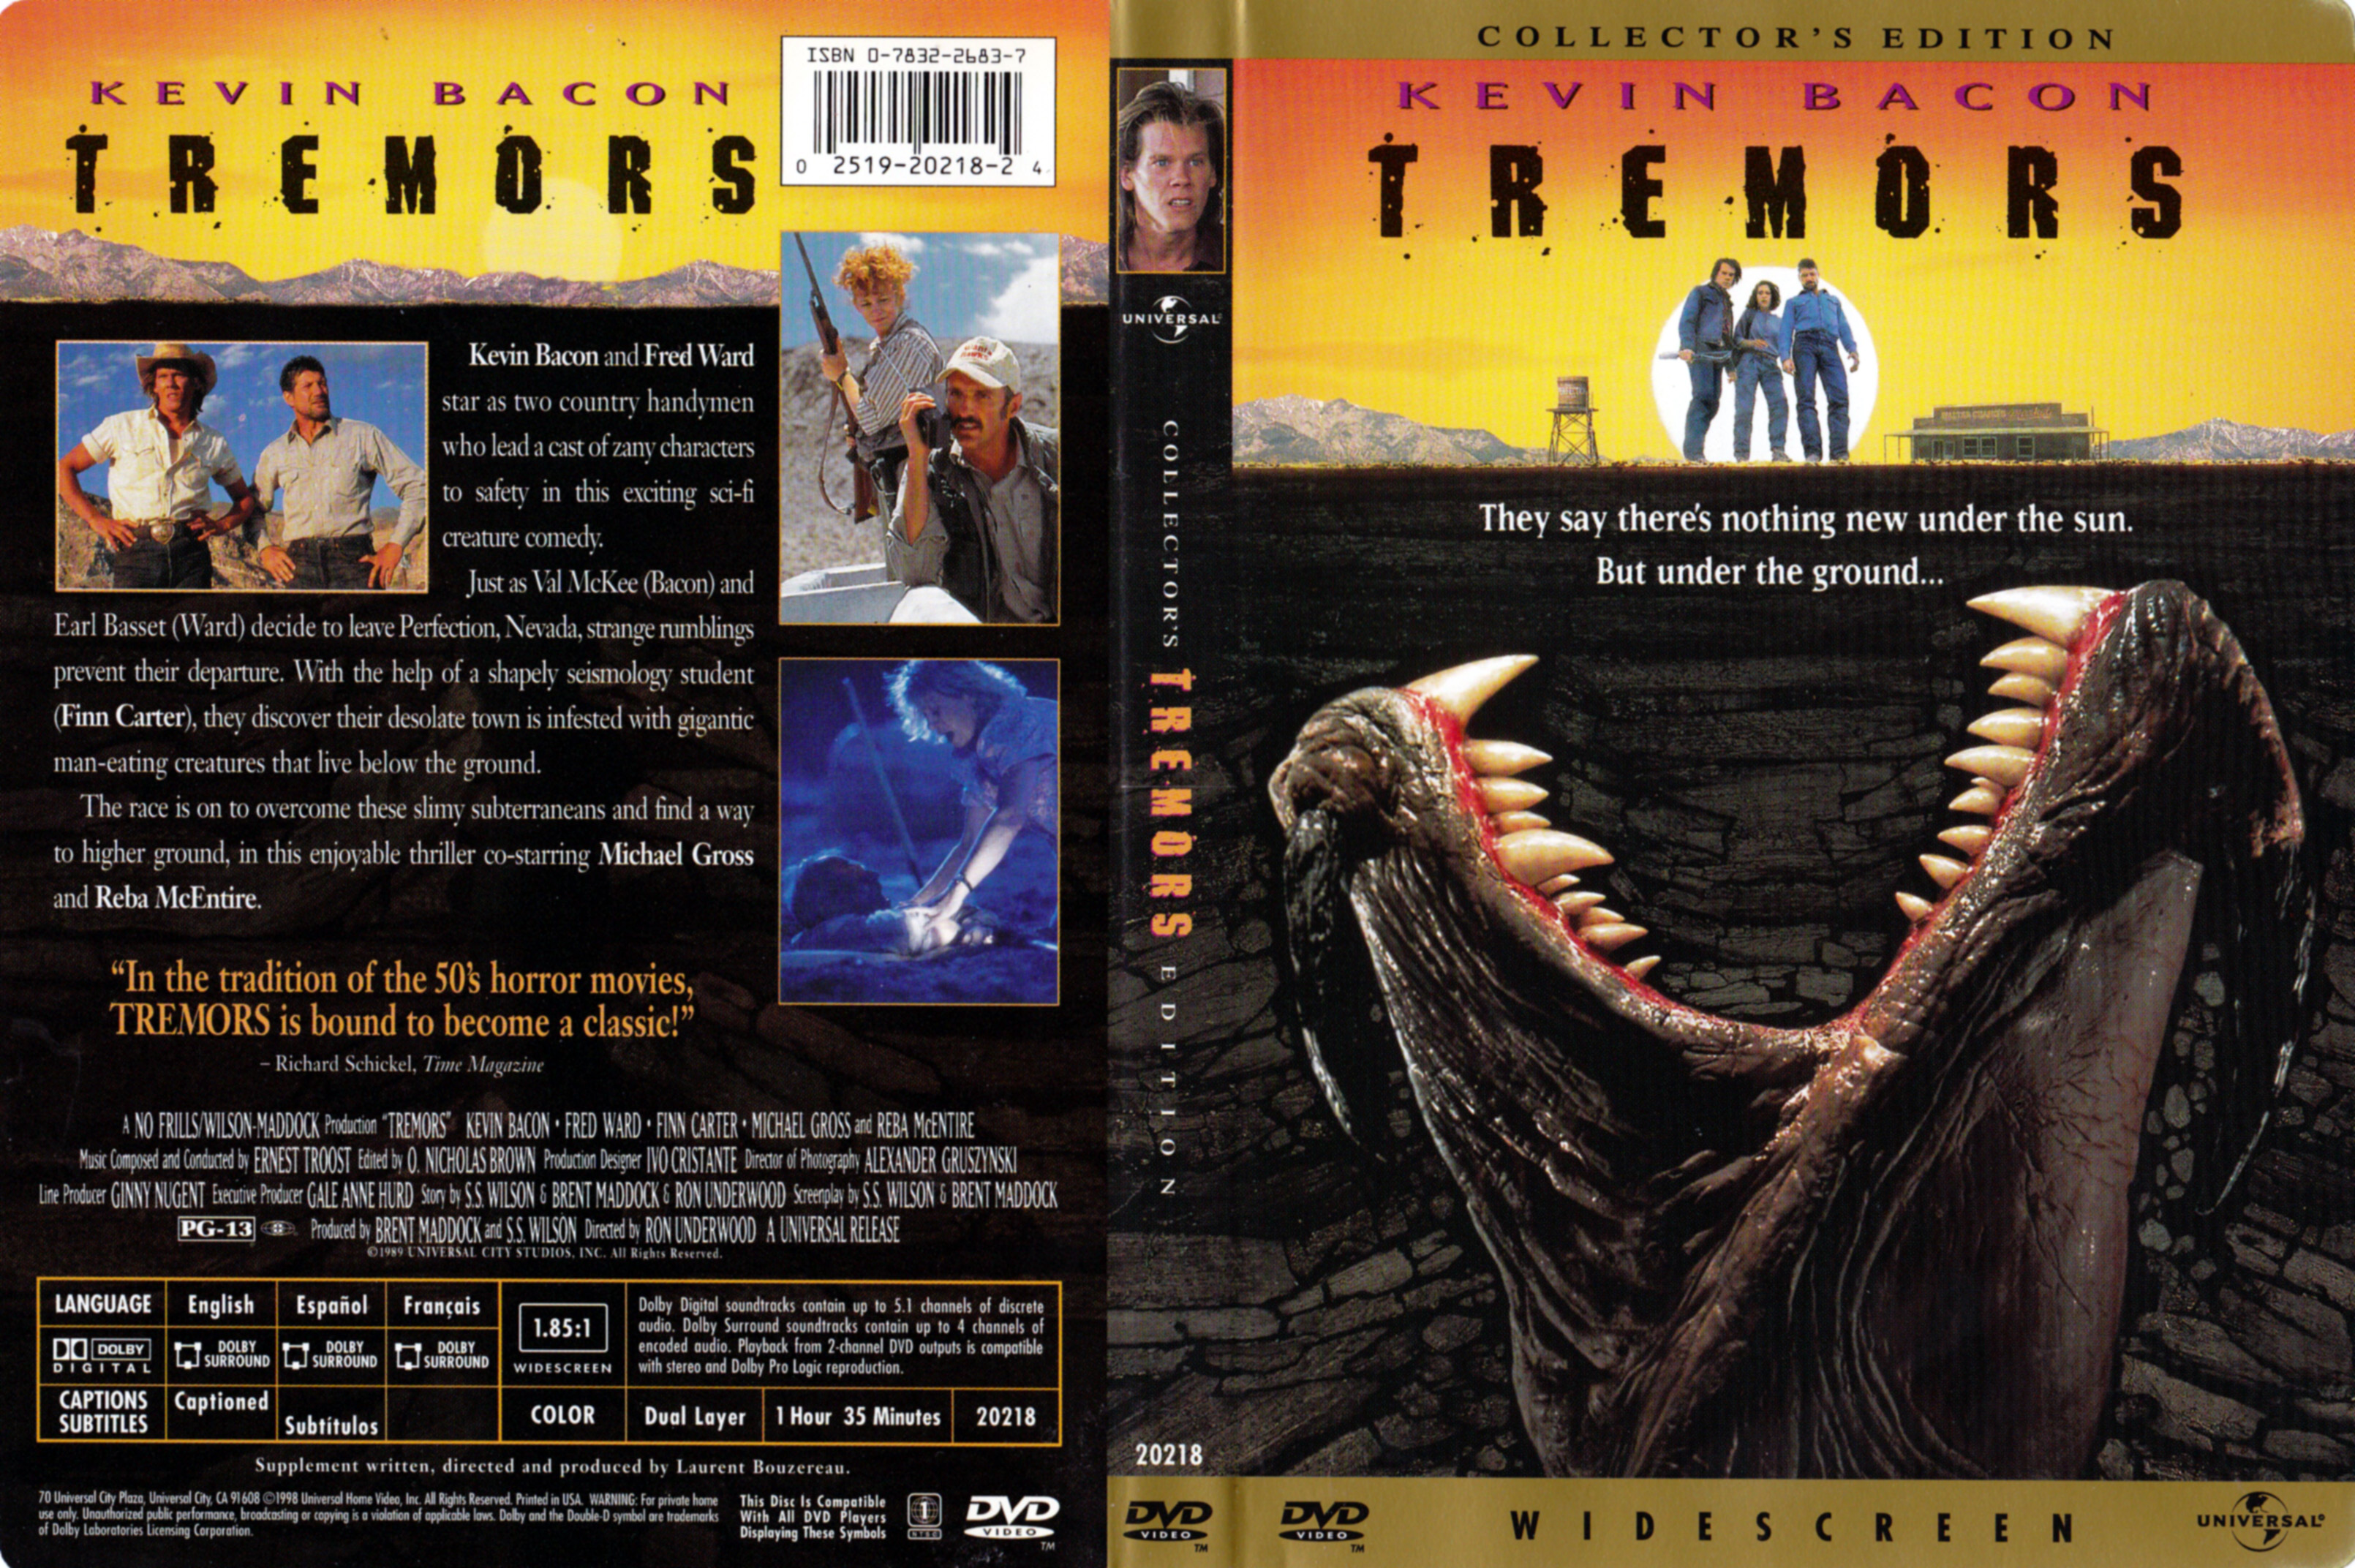 Jaquette DVD Tremors (Canadienne)